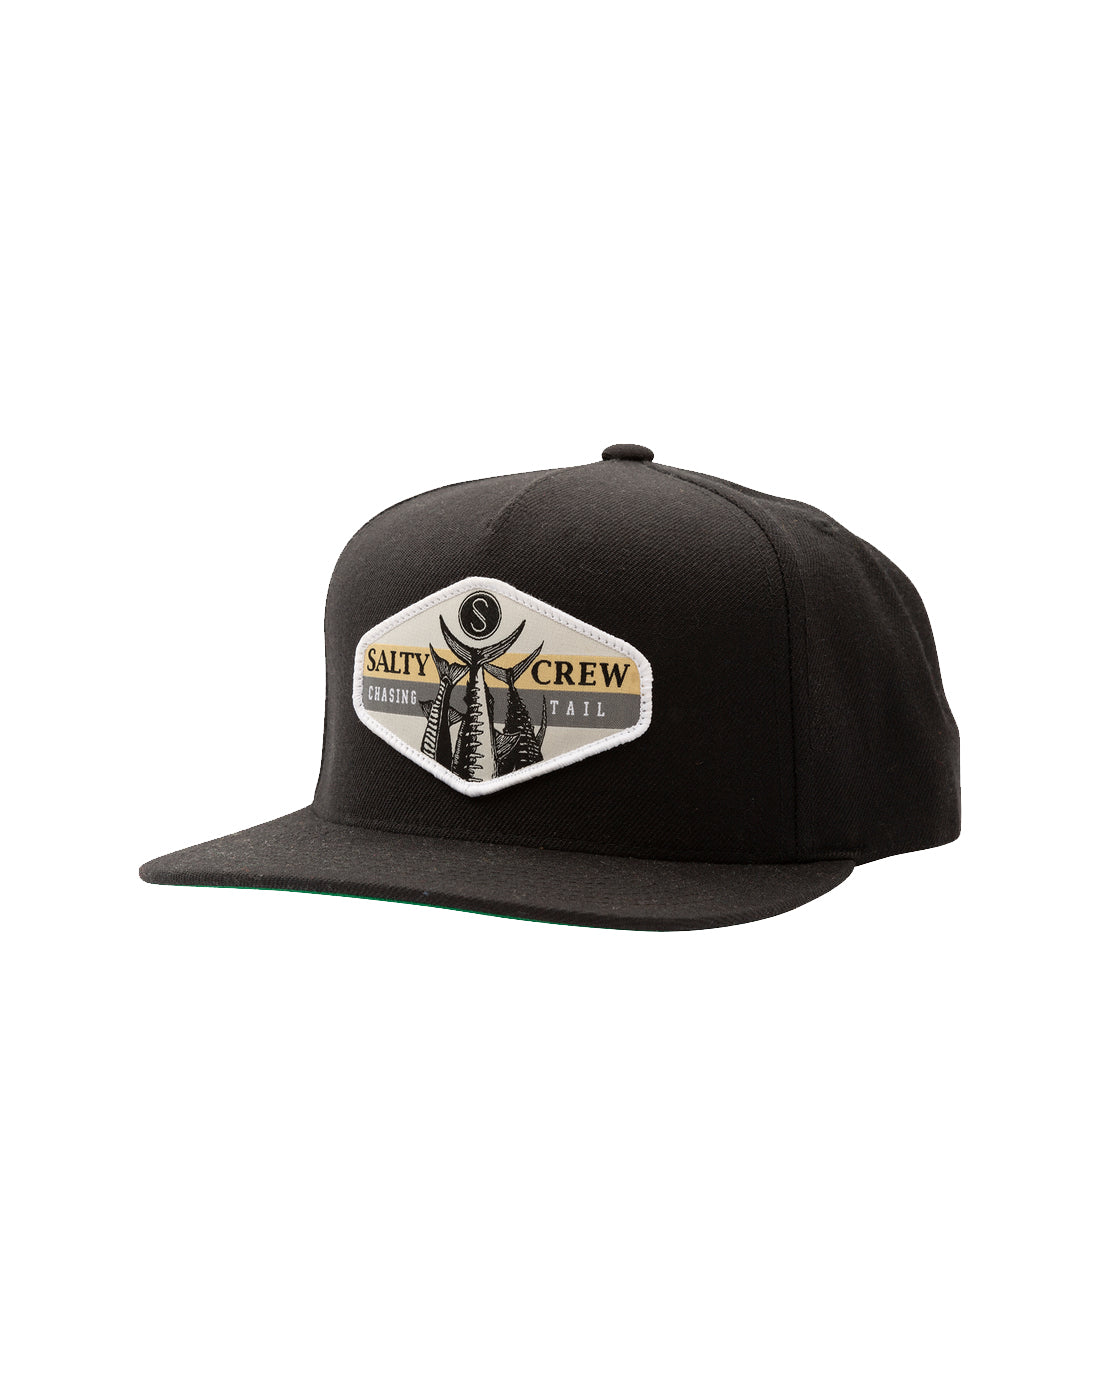 Salty Crew High Tail 5 Panel Hat Black One Size